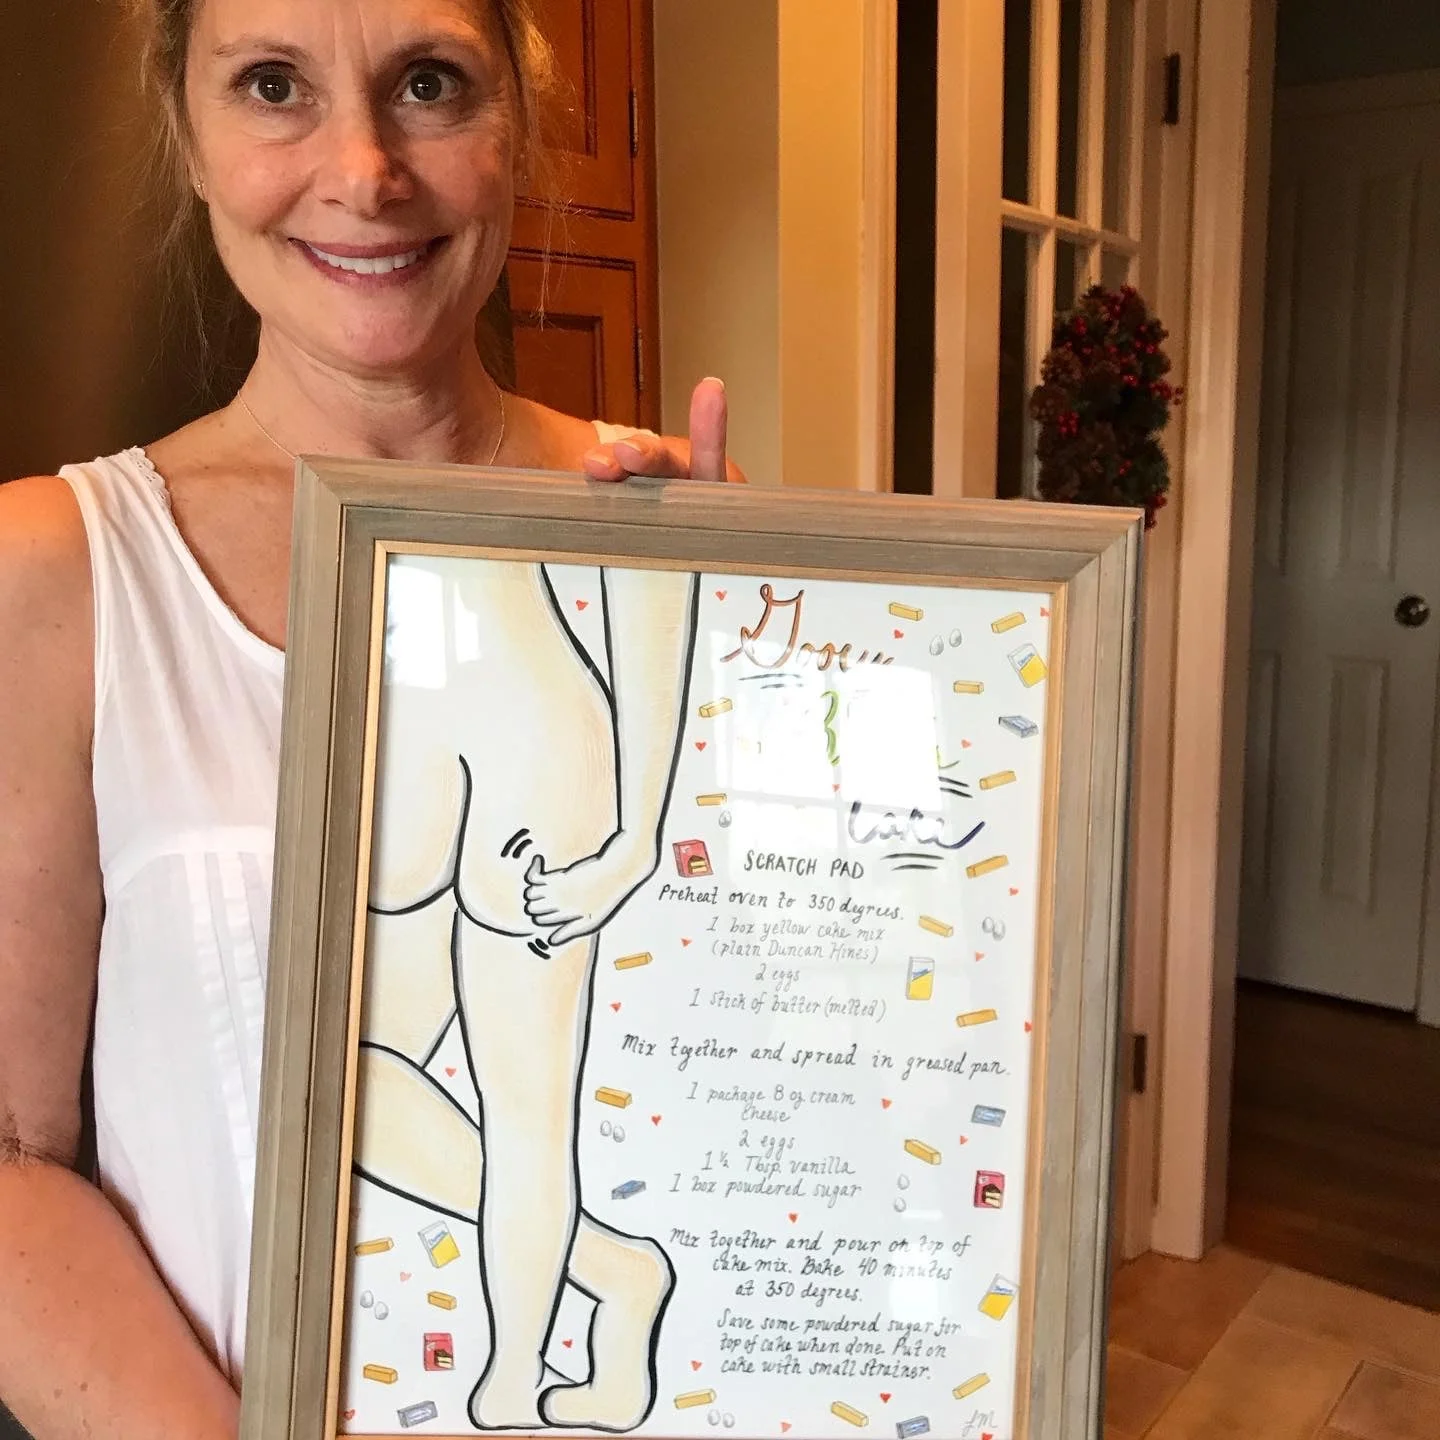 Mom with gooey butter cake recipe drawing